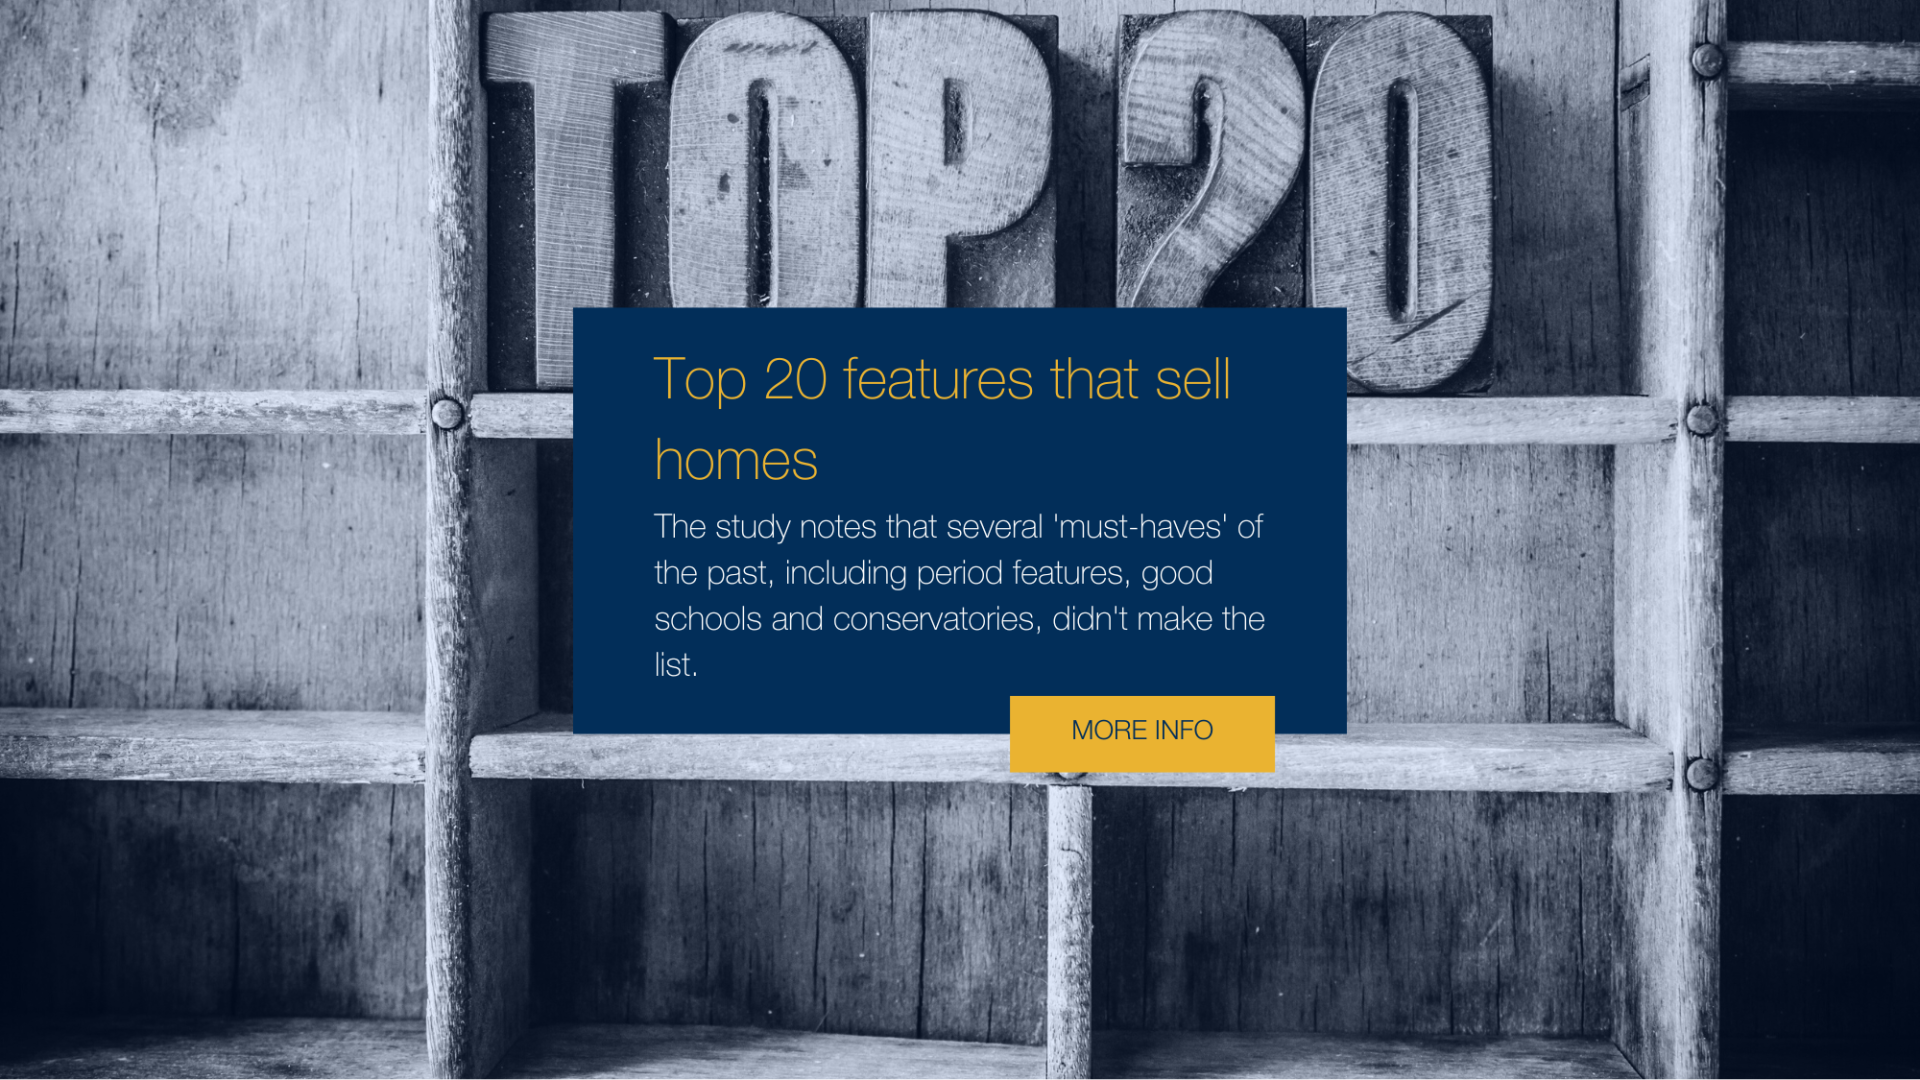 Top 20 features that sell...